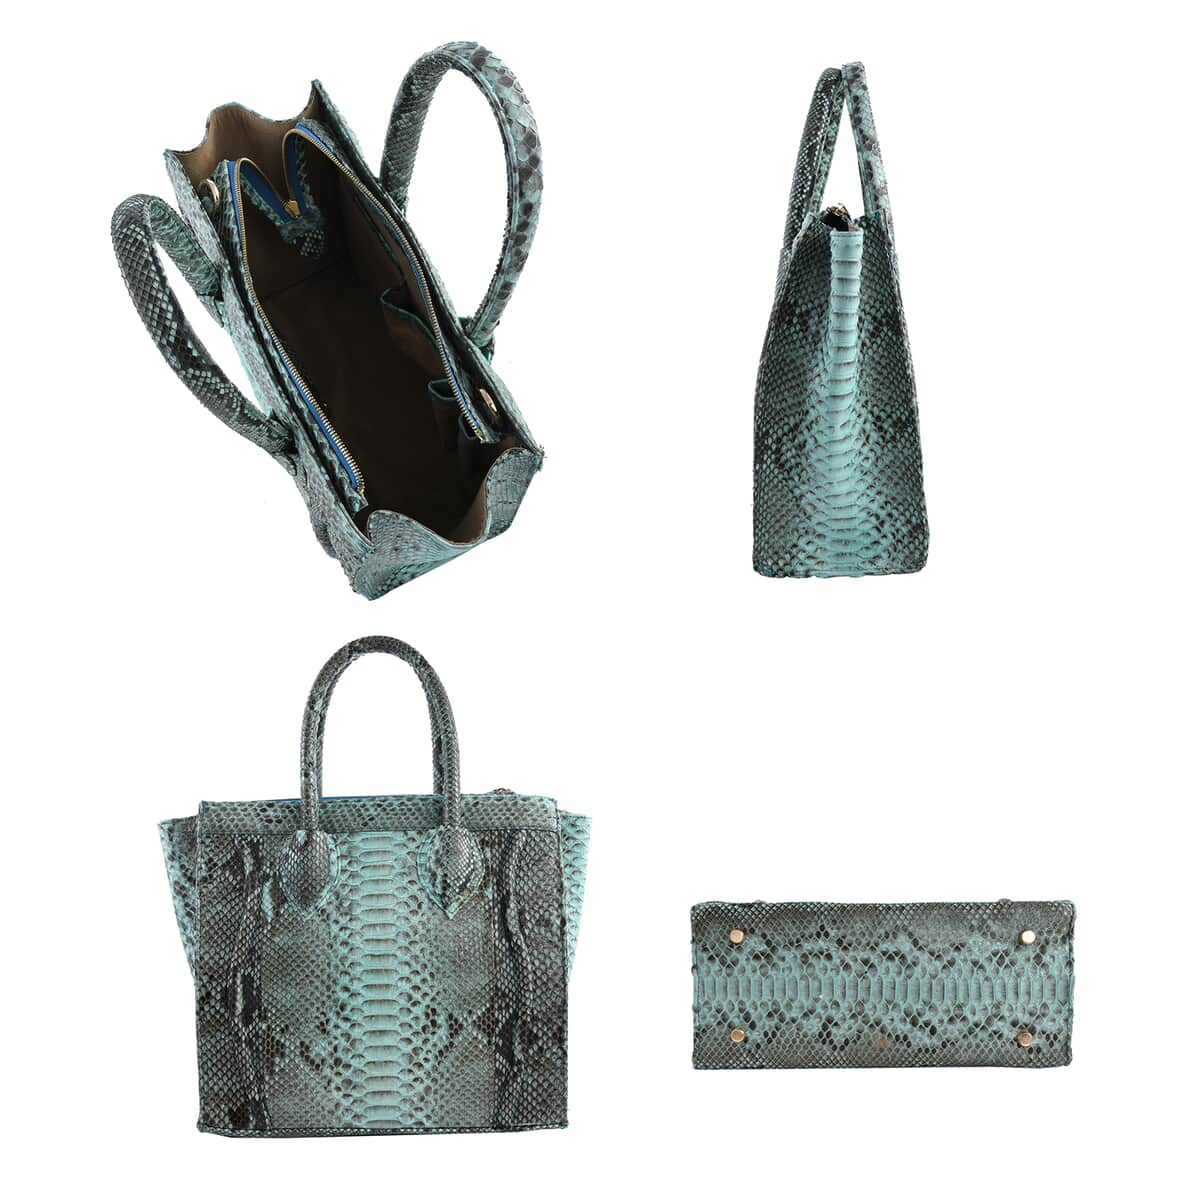 The Grand Pelle Handcrafted Turquoise Color Genuine Python Leather Tote Bag for Women with Wallet, Designer Tote Bags, Ladies Purse, Shoulder Handbags, Leather Wallet image number 6